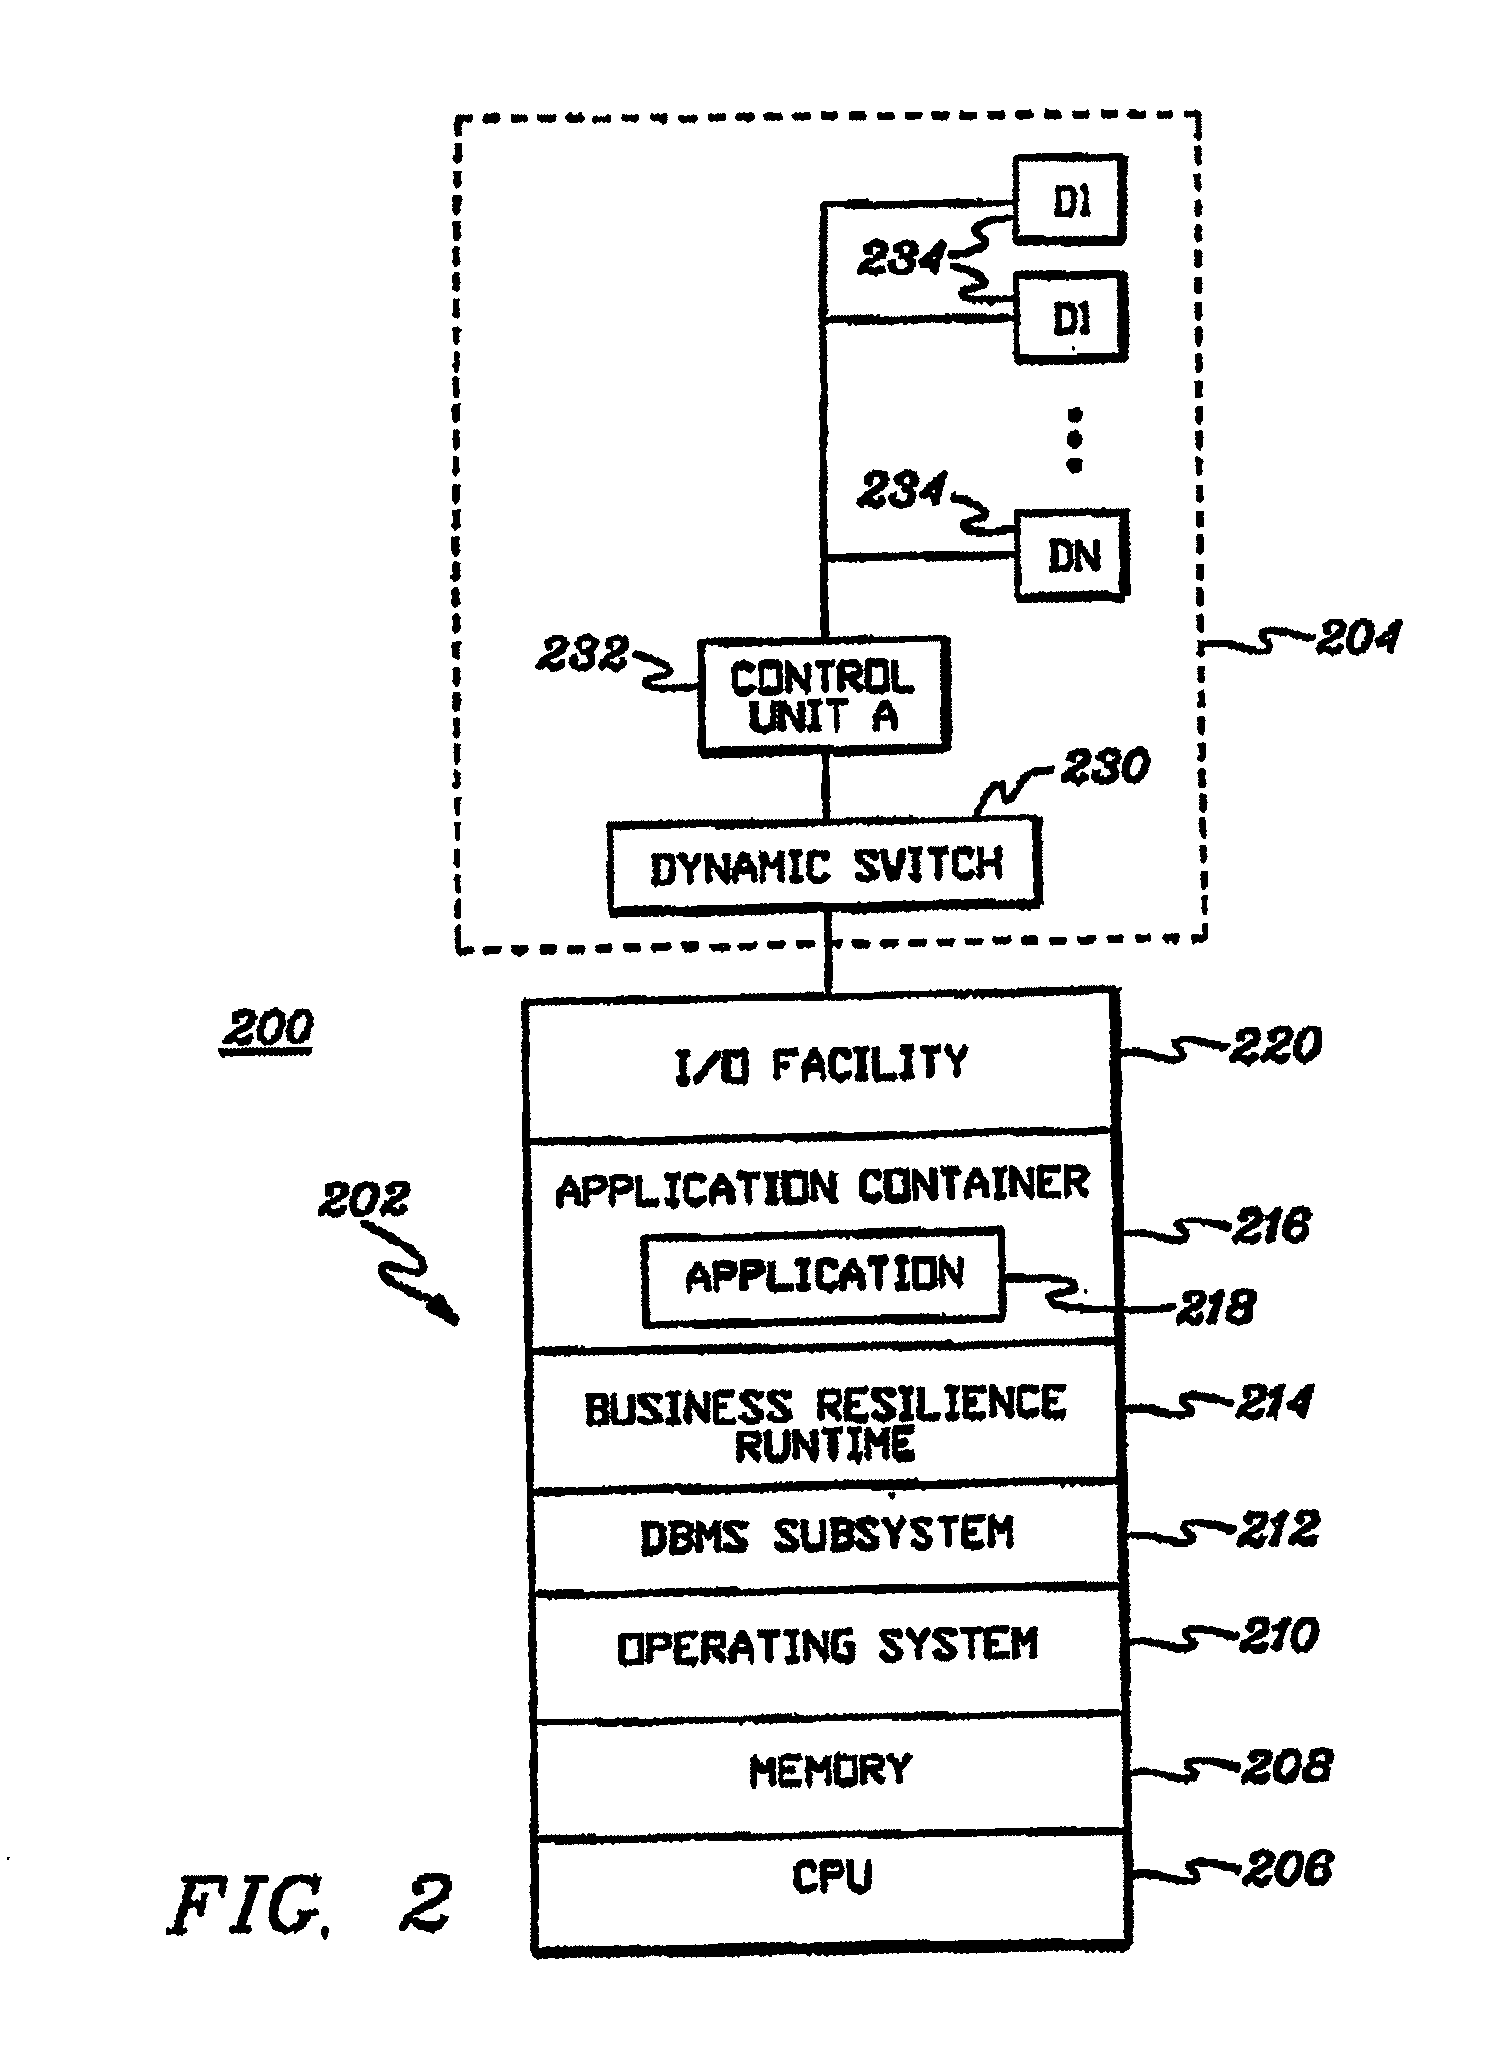 Conditional computer runtime control of an information technology environment based on pairing constructs